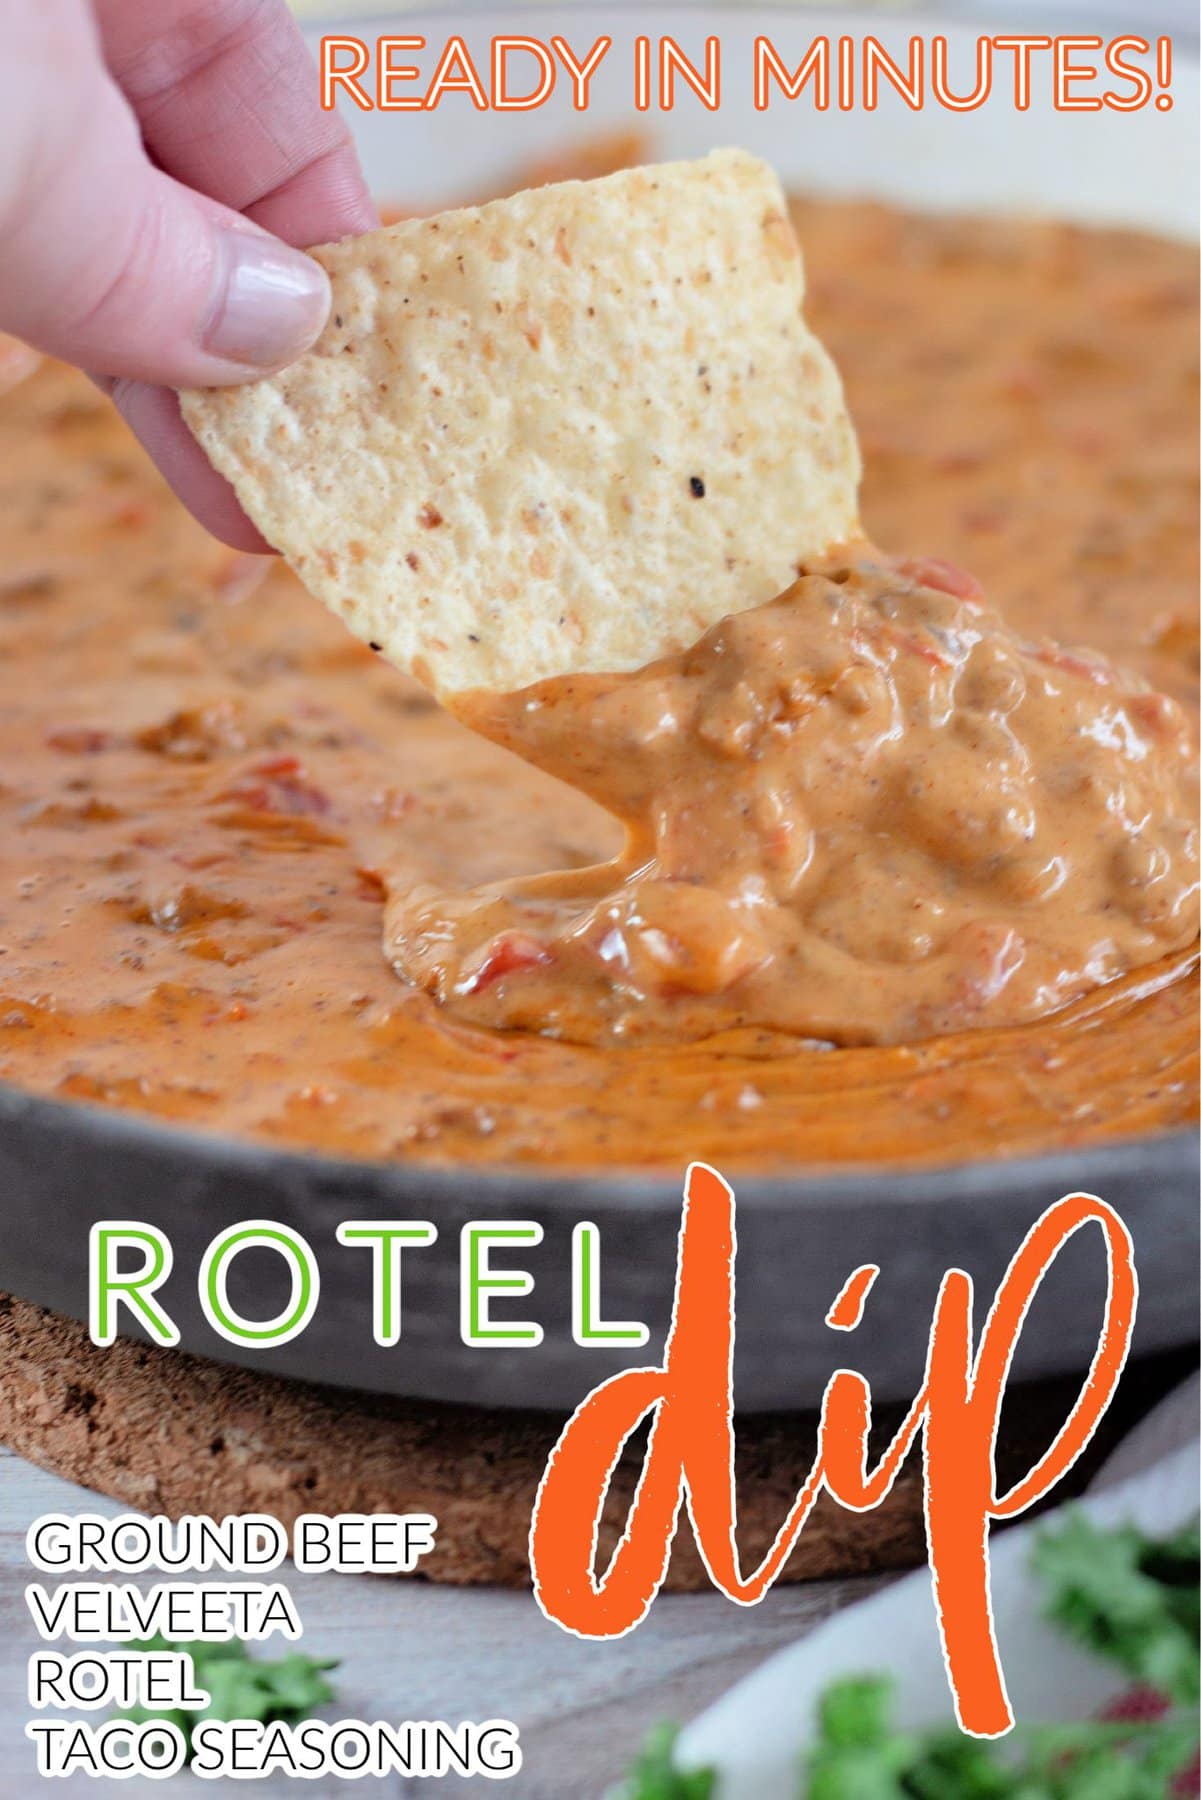 Rotel Dip with Ground Beef on Pinterest.